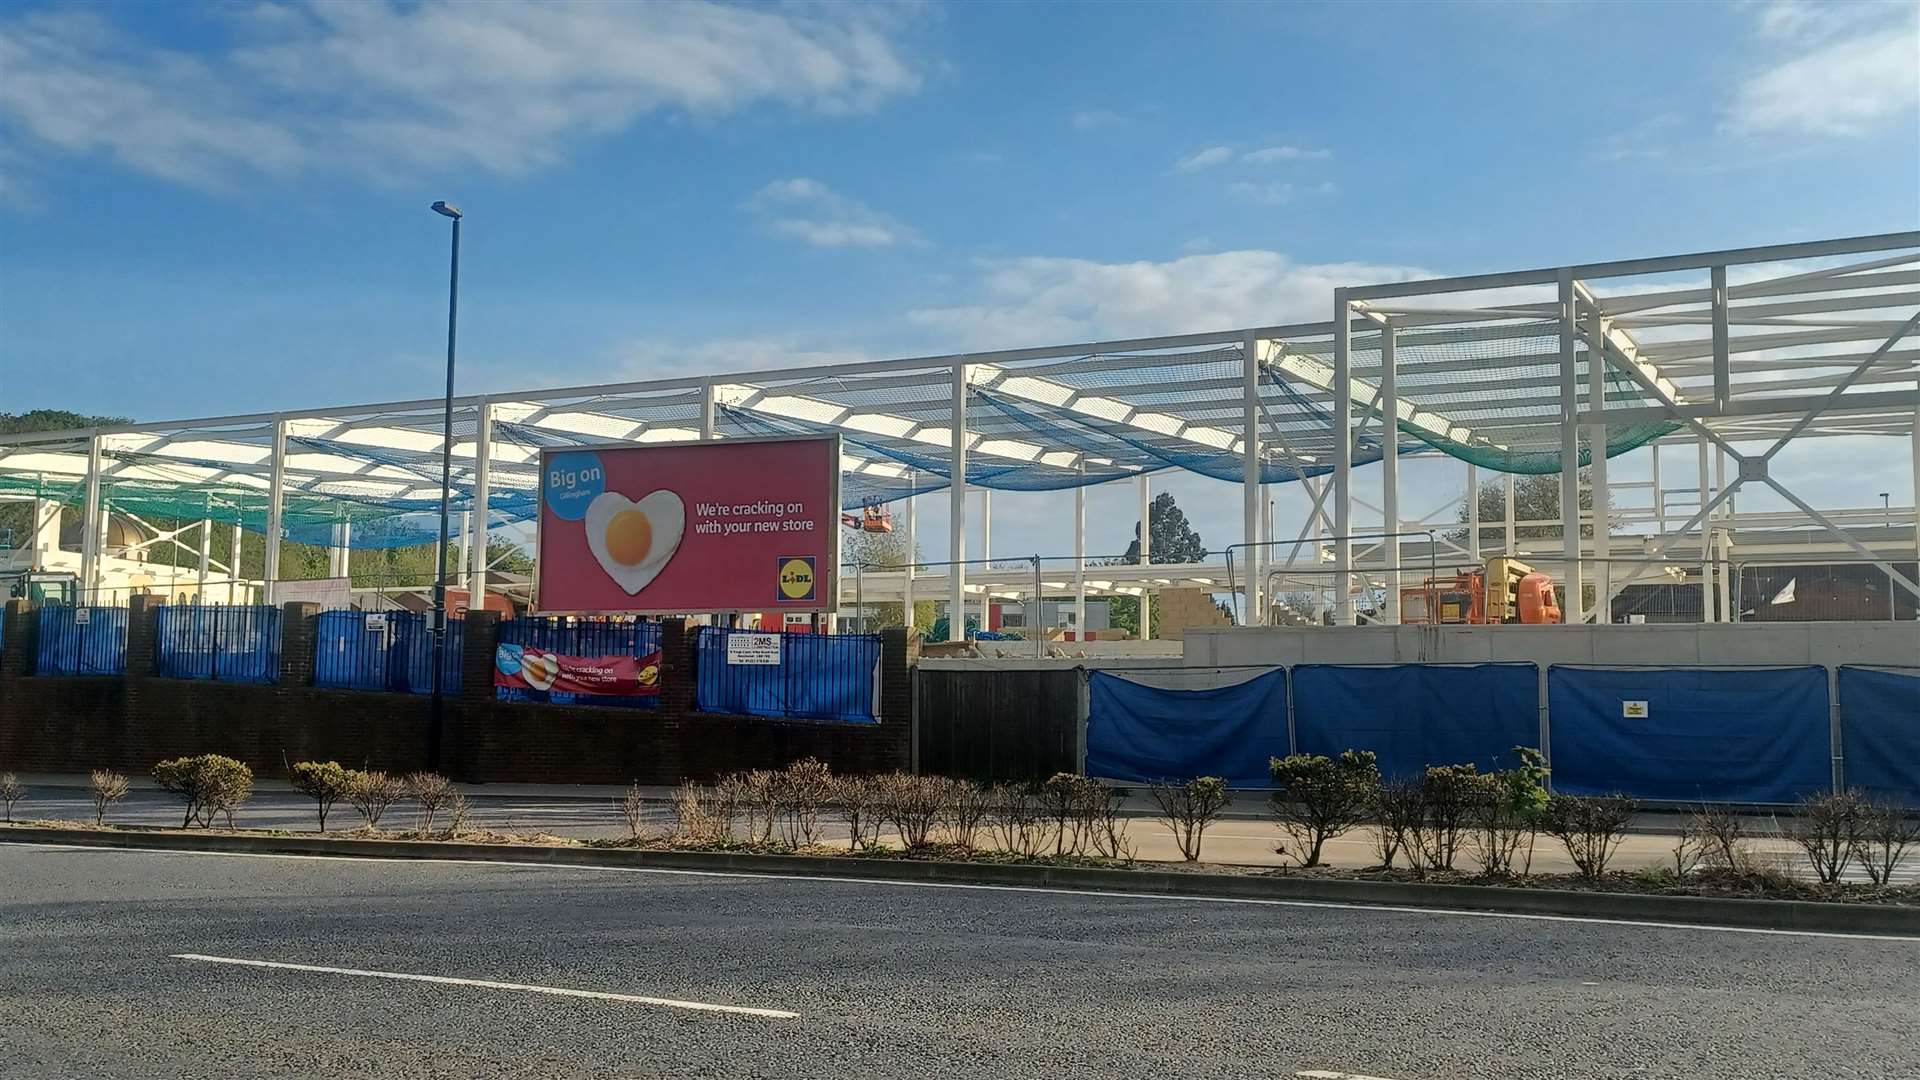 The new Lidl store is being built off Pier Road in Gillingham